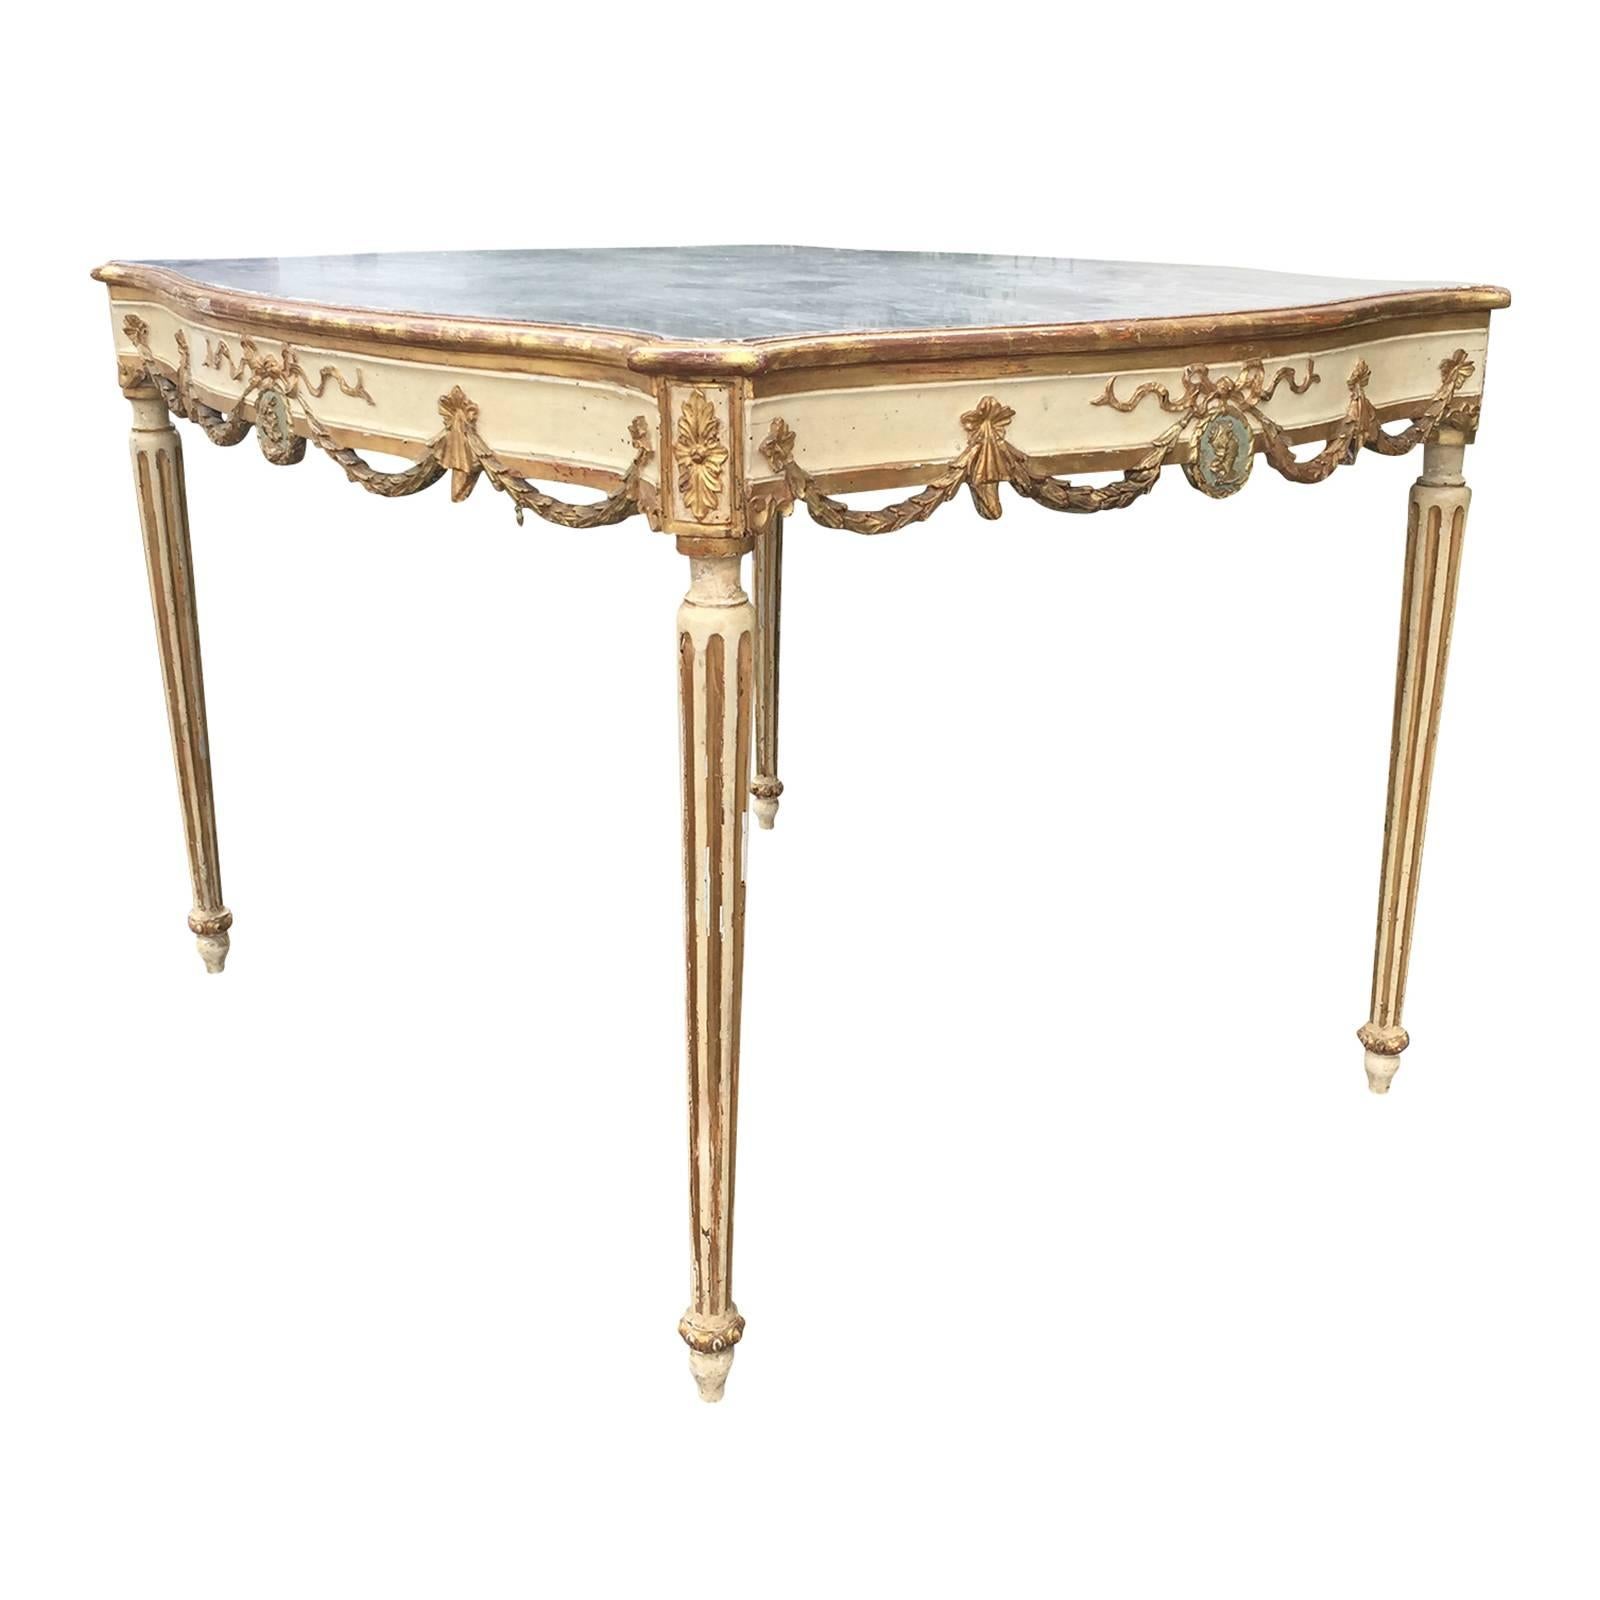 18th or 19th century Italian centre table with garland.